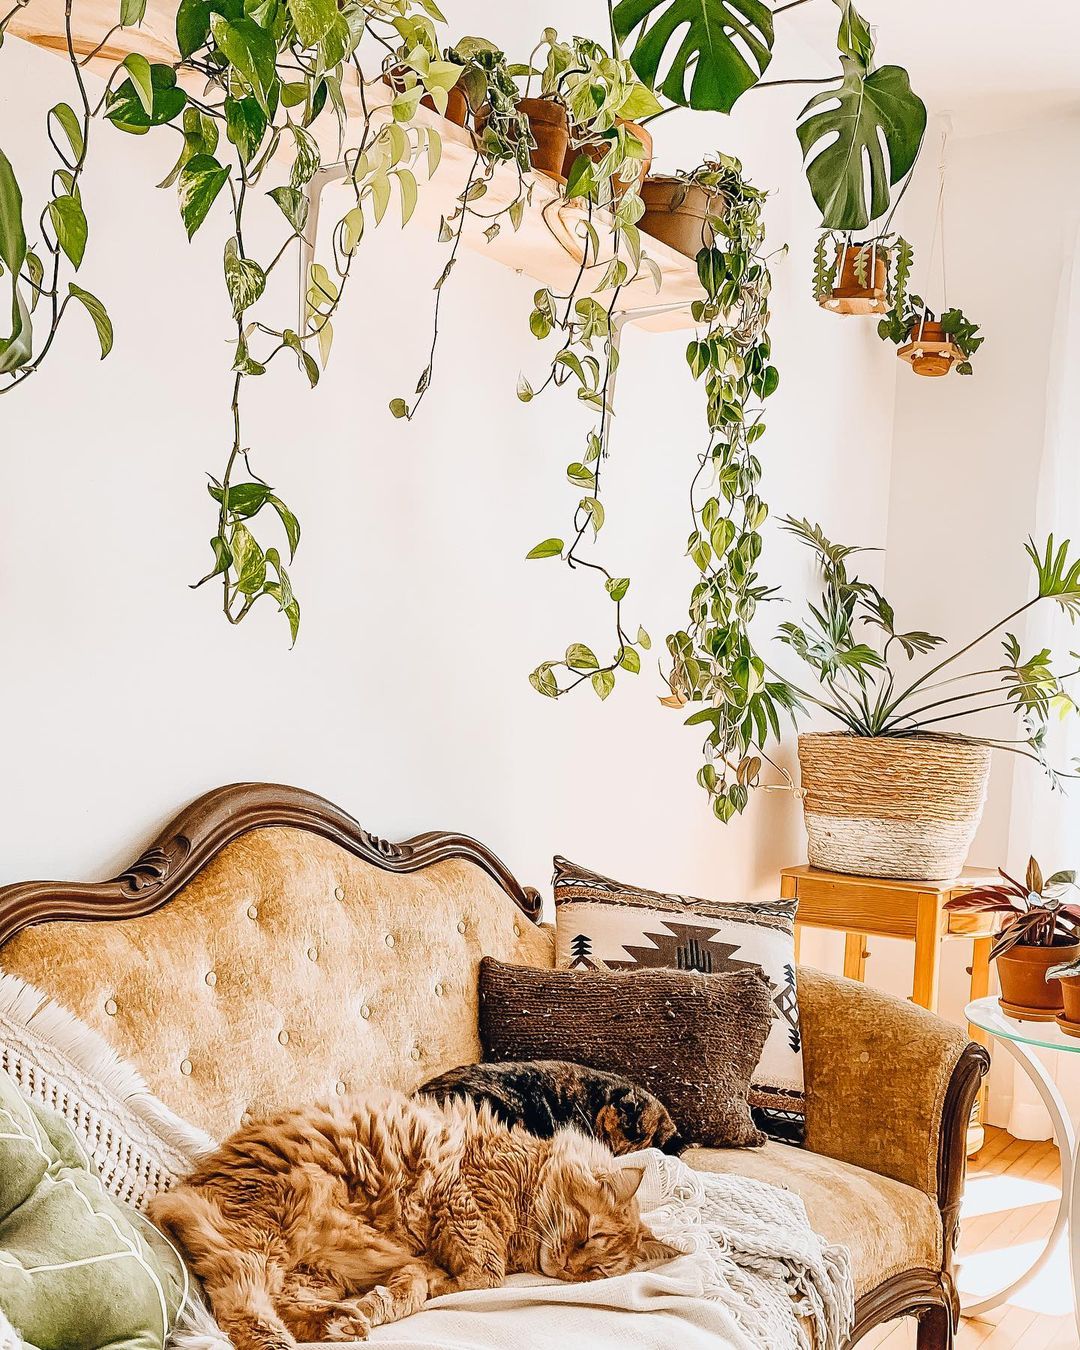 Urban jungle living room with plants hanging from a shelf above an ornate couch with a potted plant on a side table. Photo by instagram user @coffeeinmyjungle